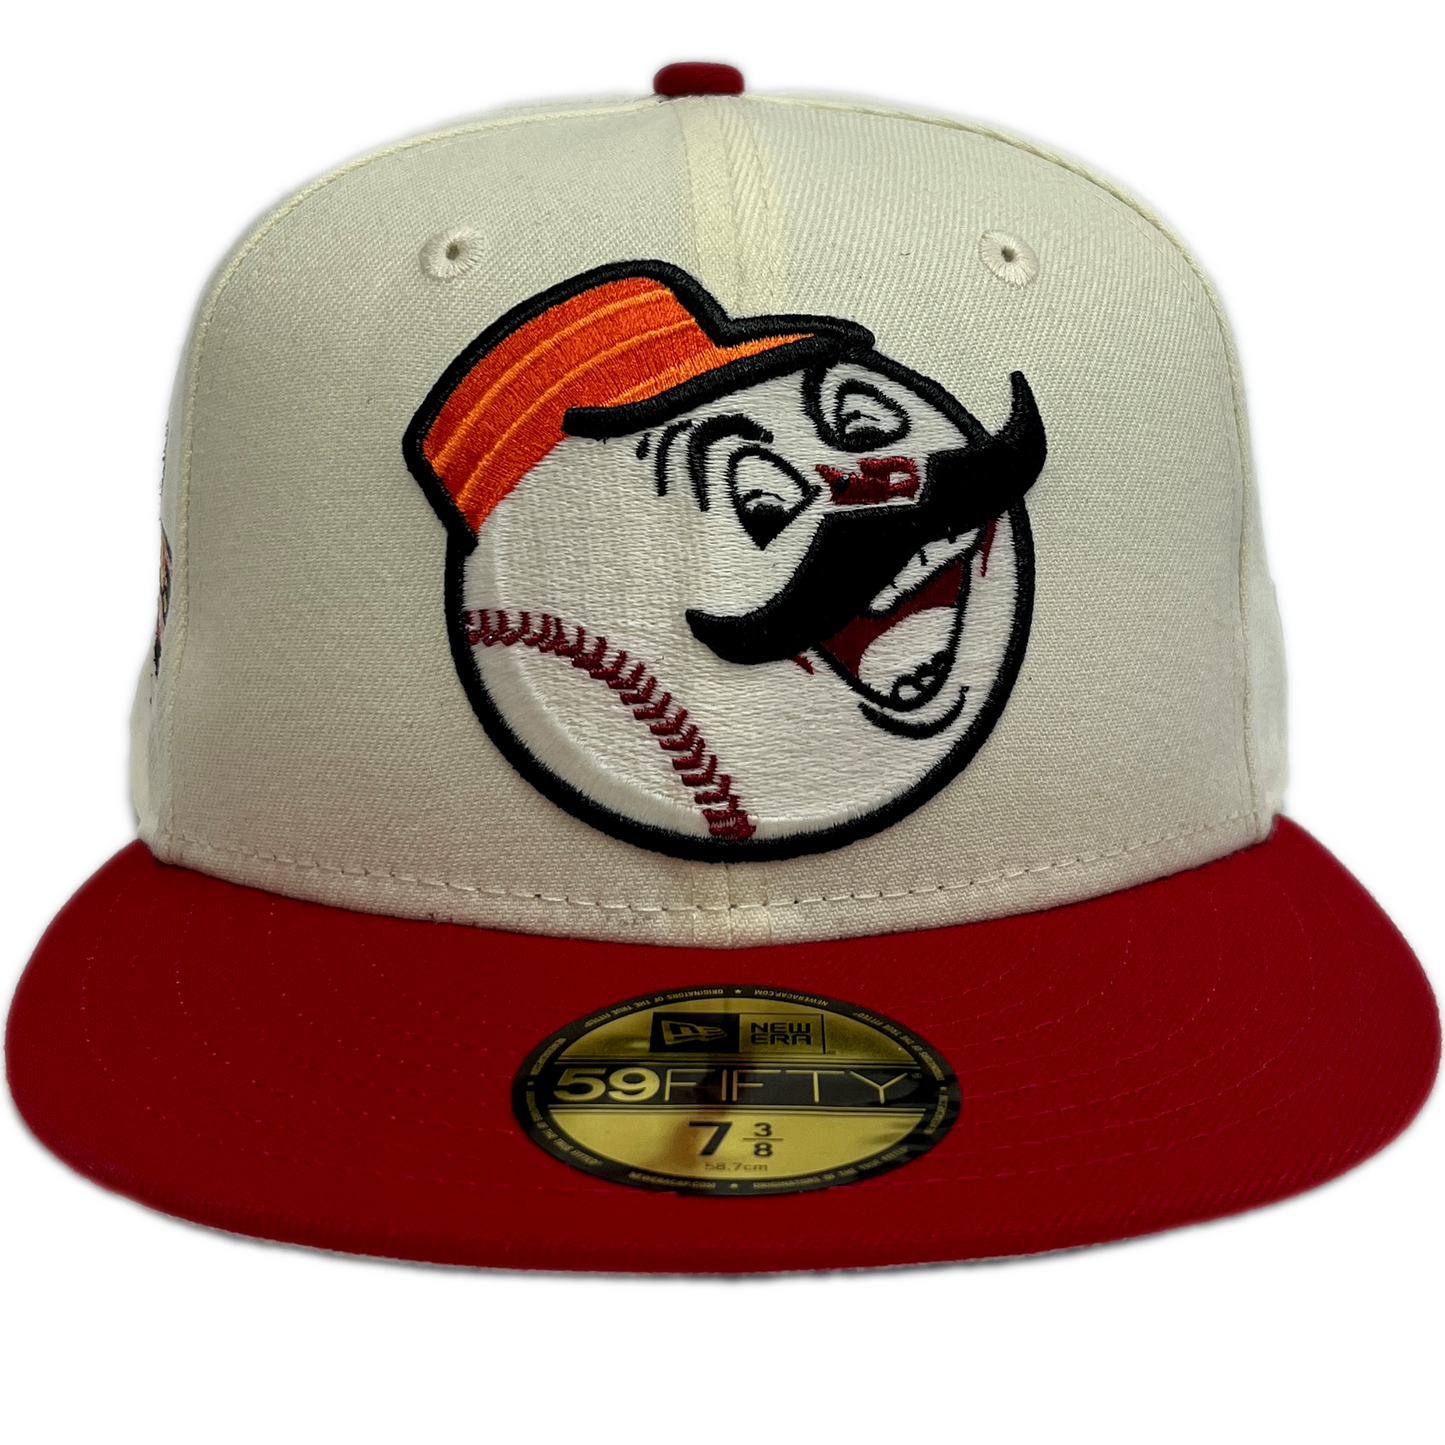 New Era Cincinnati Reds 59FIFTY Fitted Hat - Chrome/ Scarlet